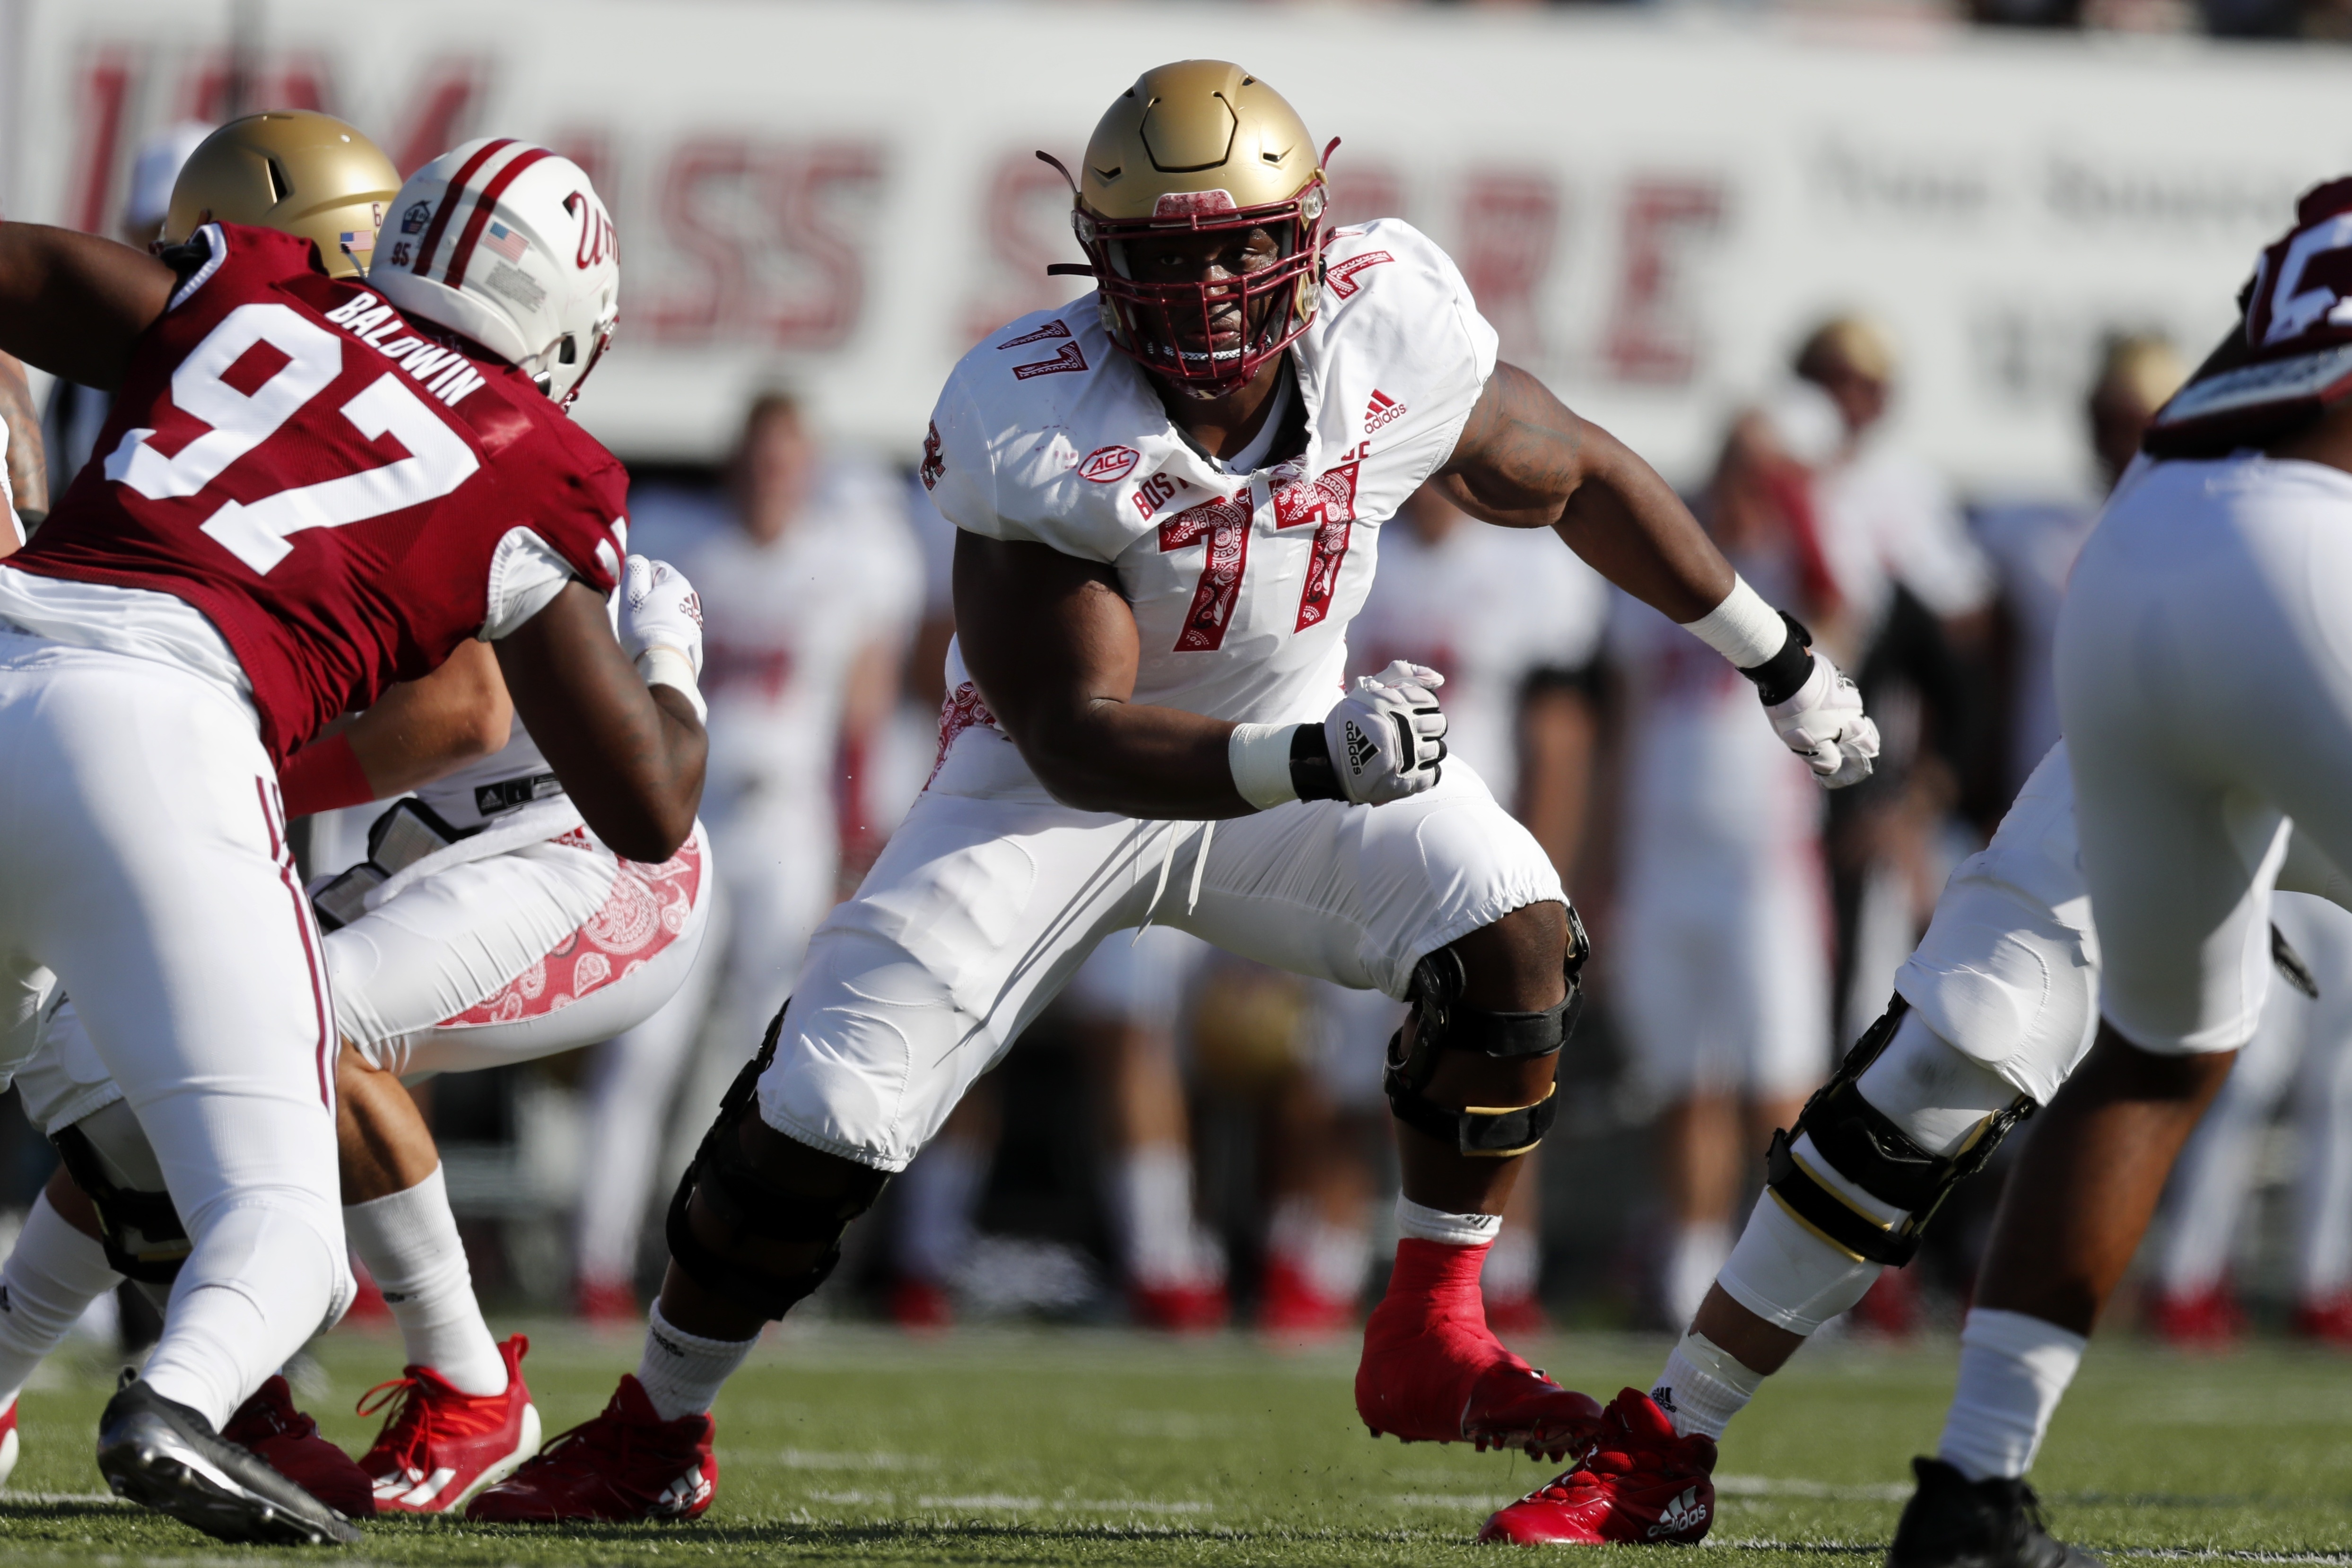 Chargers draft Boston College OG Zion Johnson in first round